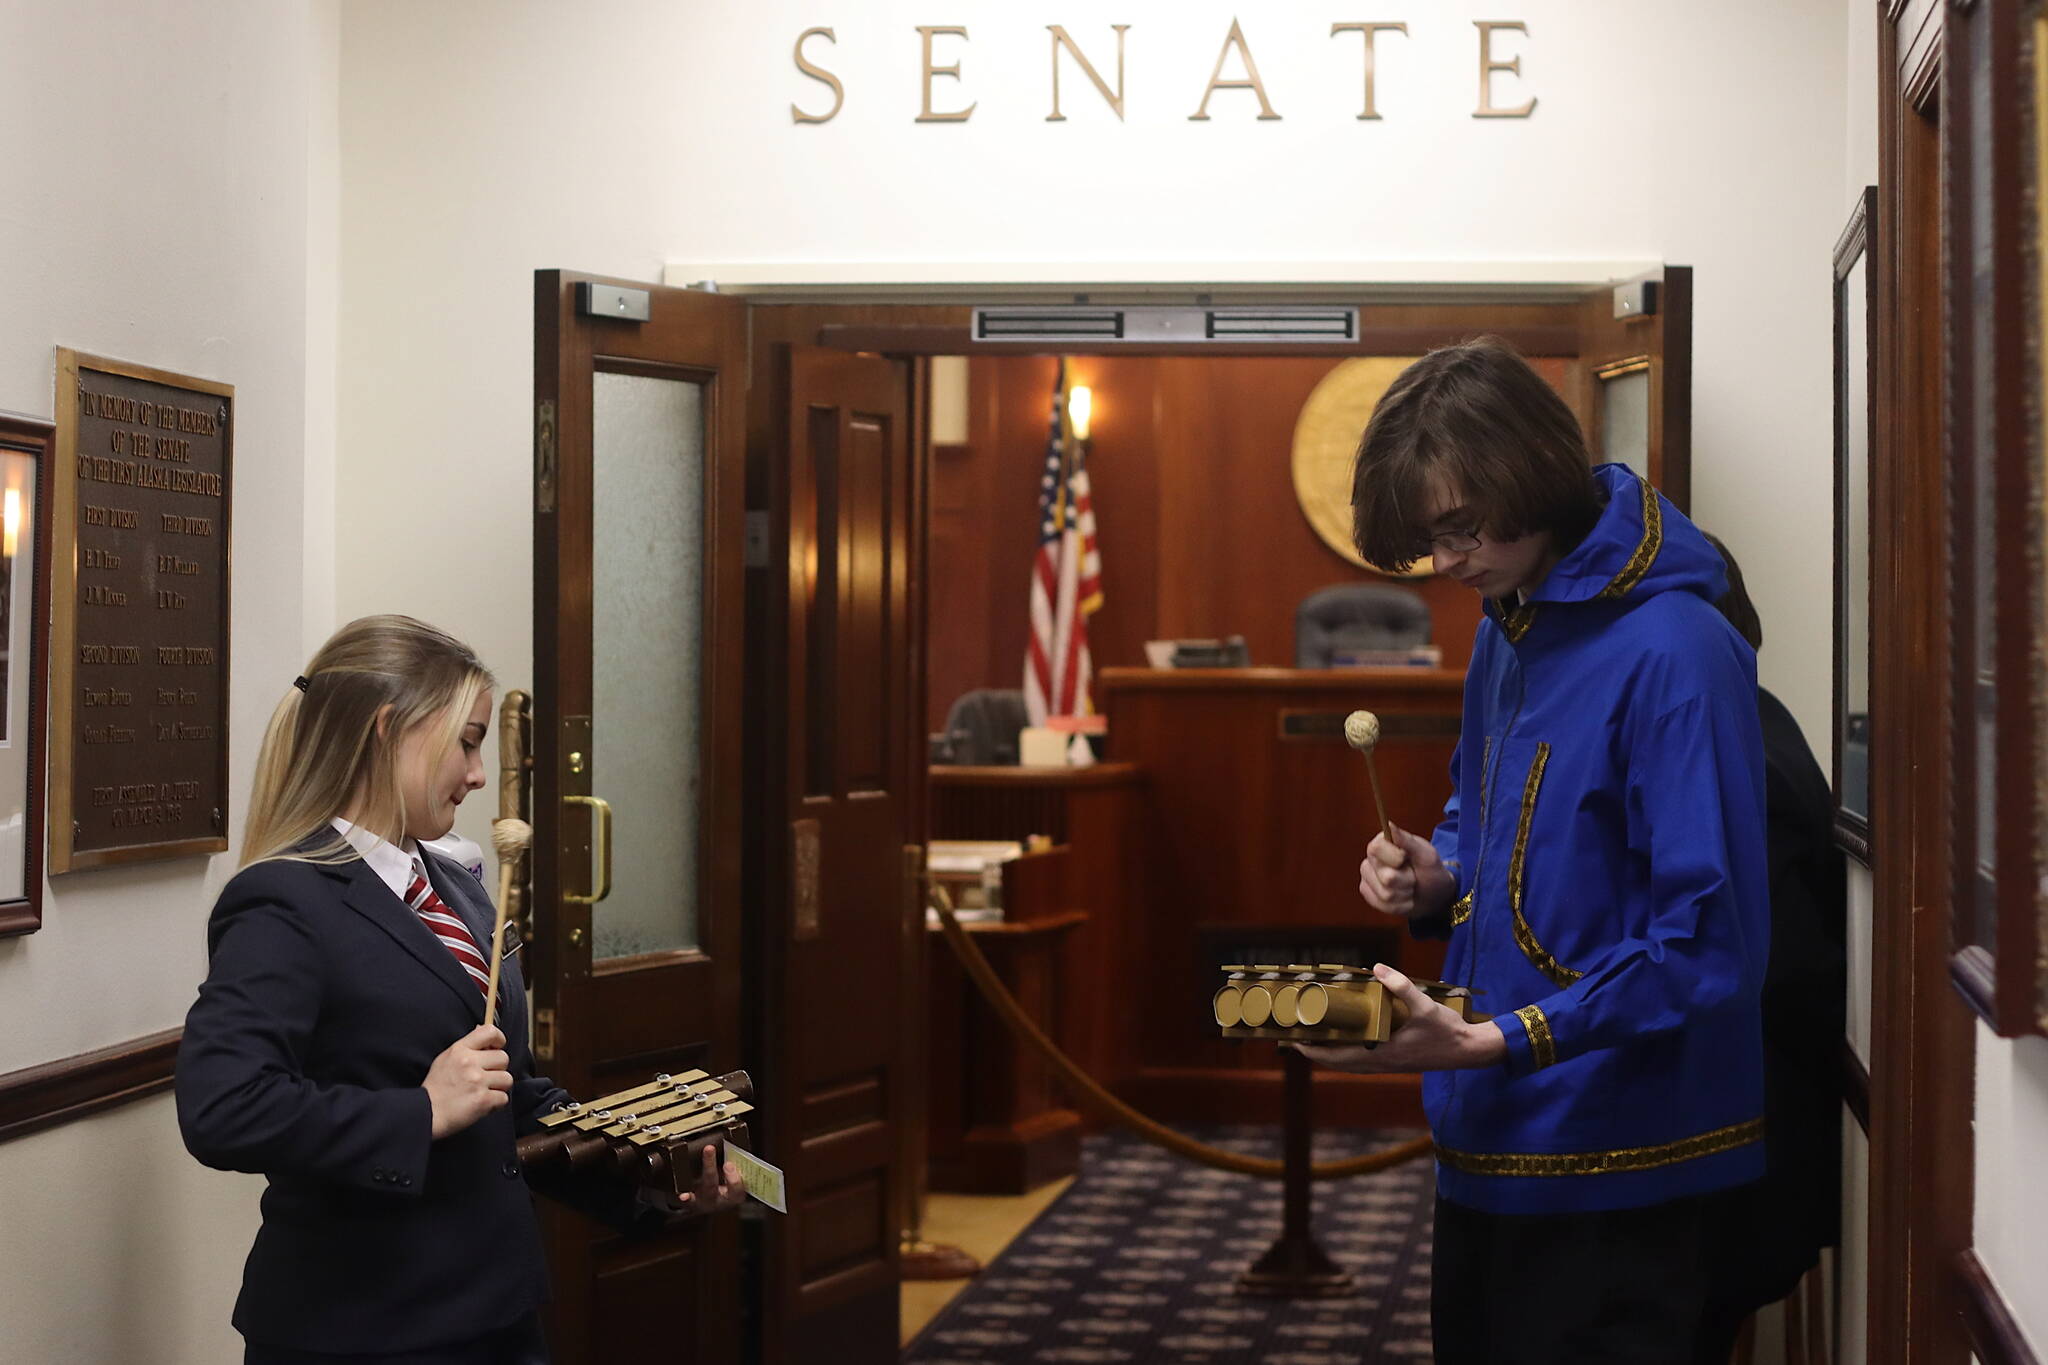 Senate pages Jenna Carpenter and Zaxon Tomaszewski play “Off To The Races” outside the Senate Chambers exactly 15 minutes before the start of the floor session. Pages then perform the tones alerting senators the session is about to start on all floors of the Capitol where the legislators have offices. The House relies on an electronic bell notification that plays the famous clock chime “Westminster Quarters.” (Mark Sabbatini / Juneau Empire)